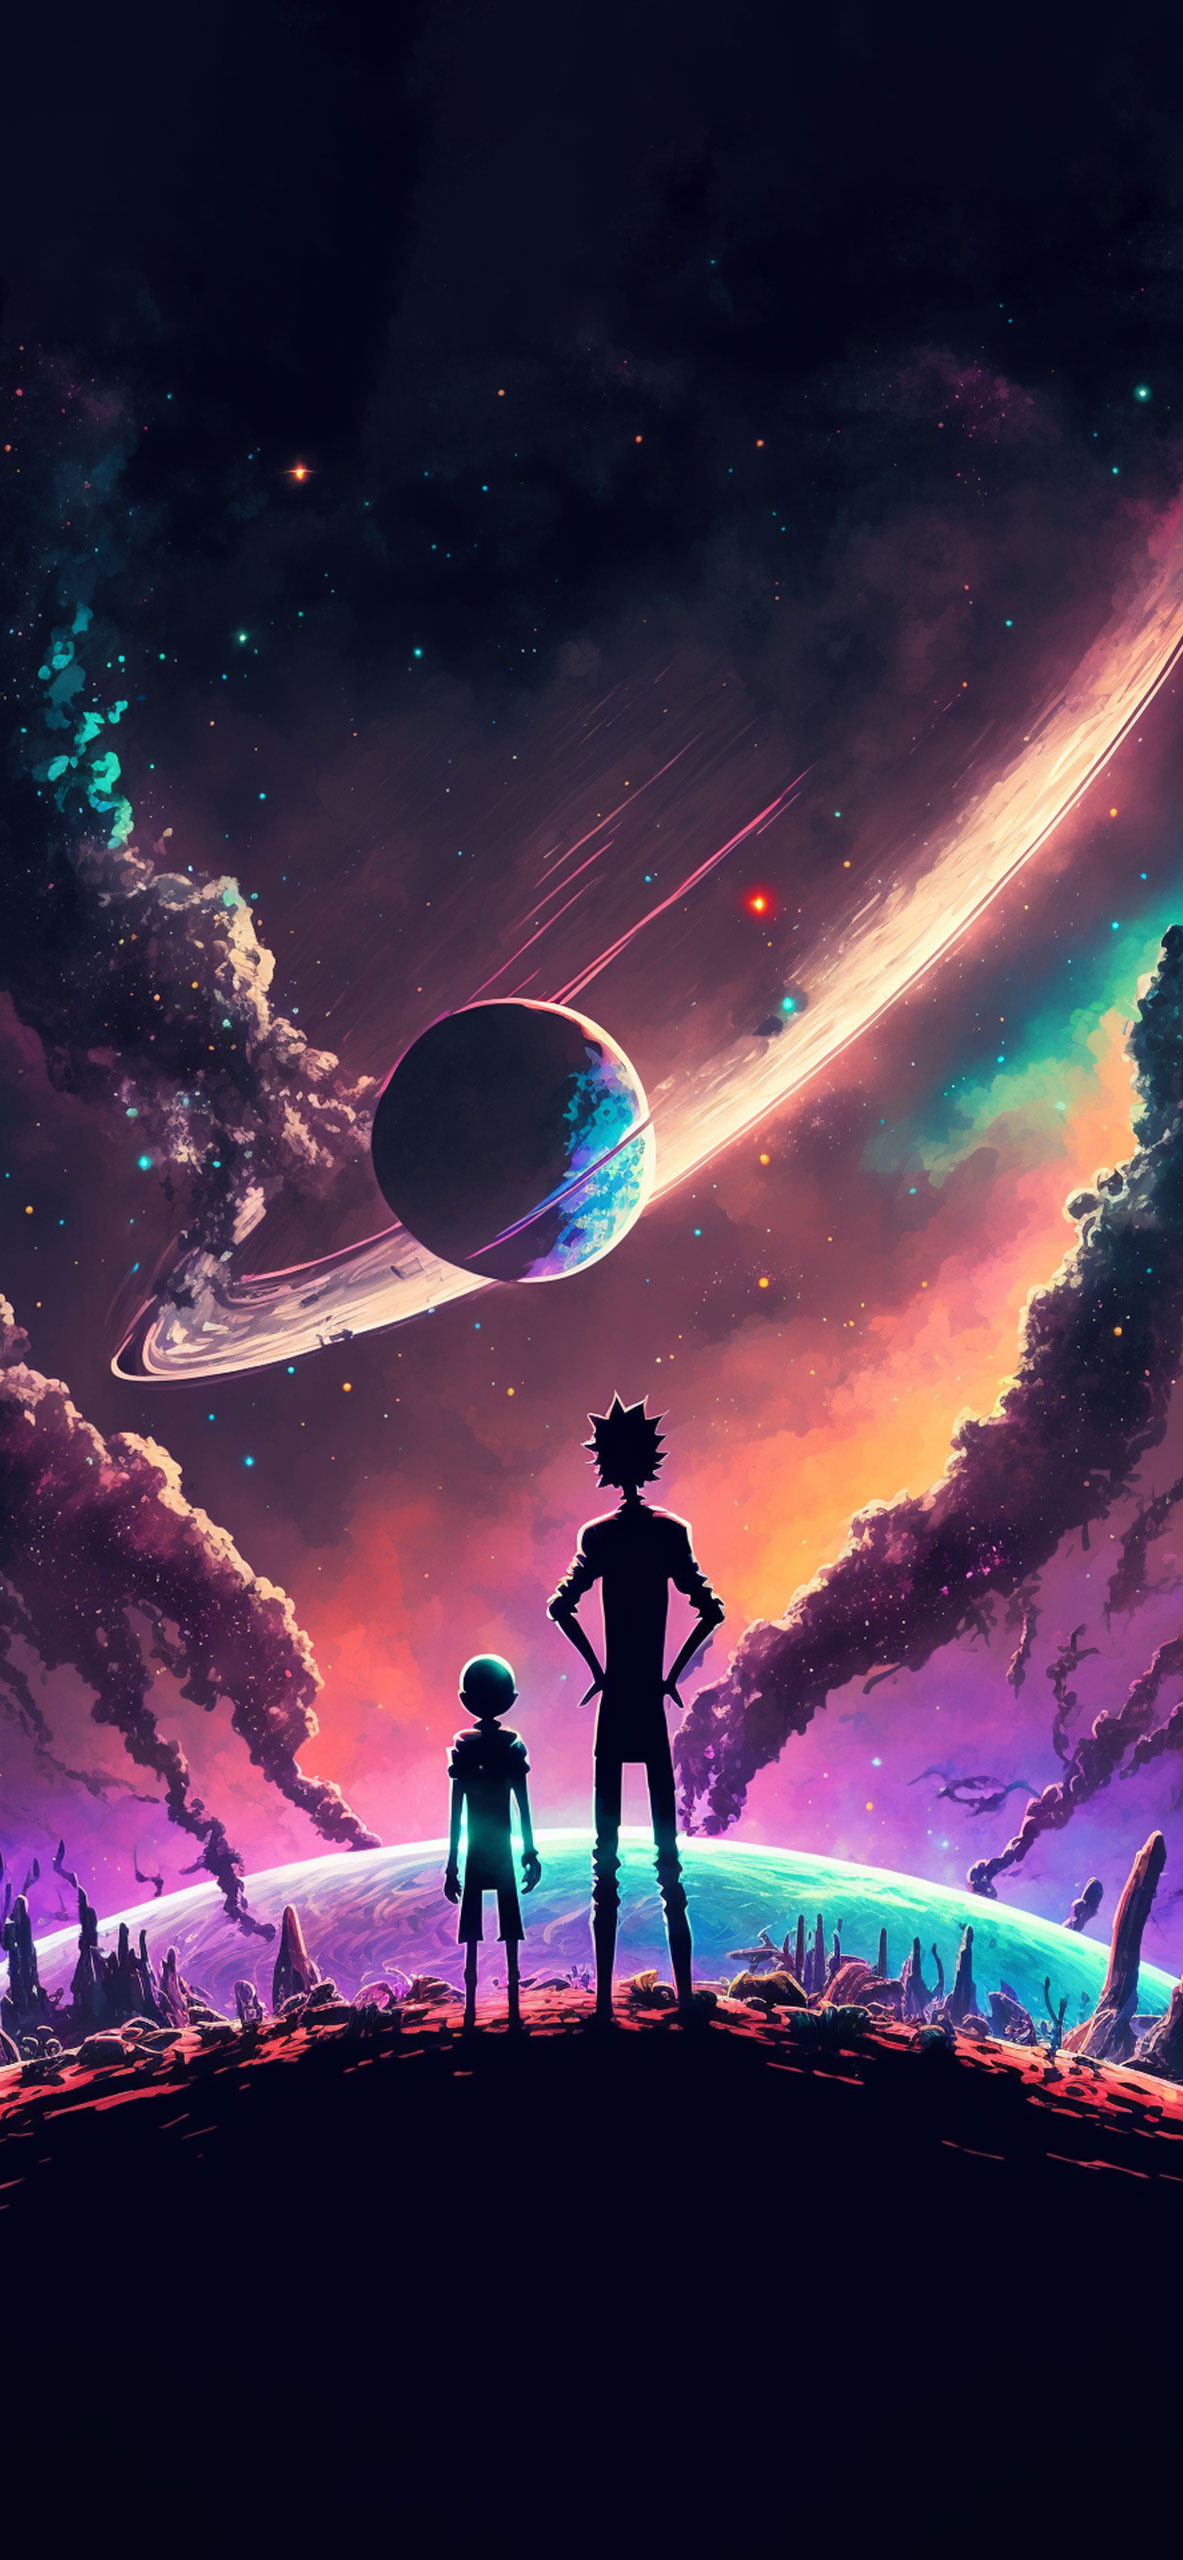 Rick and Morty Space Art Wallpapers - Rick and Morty Wallpapers